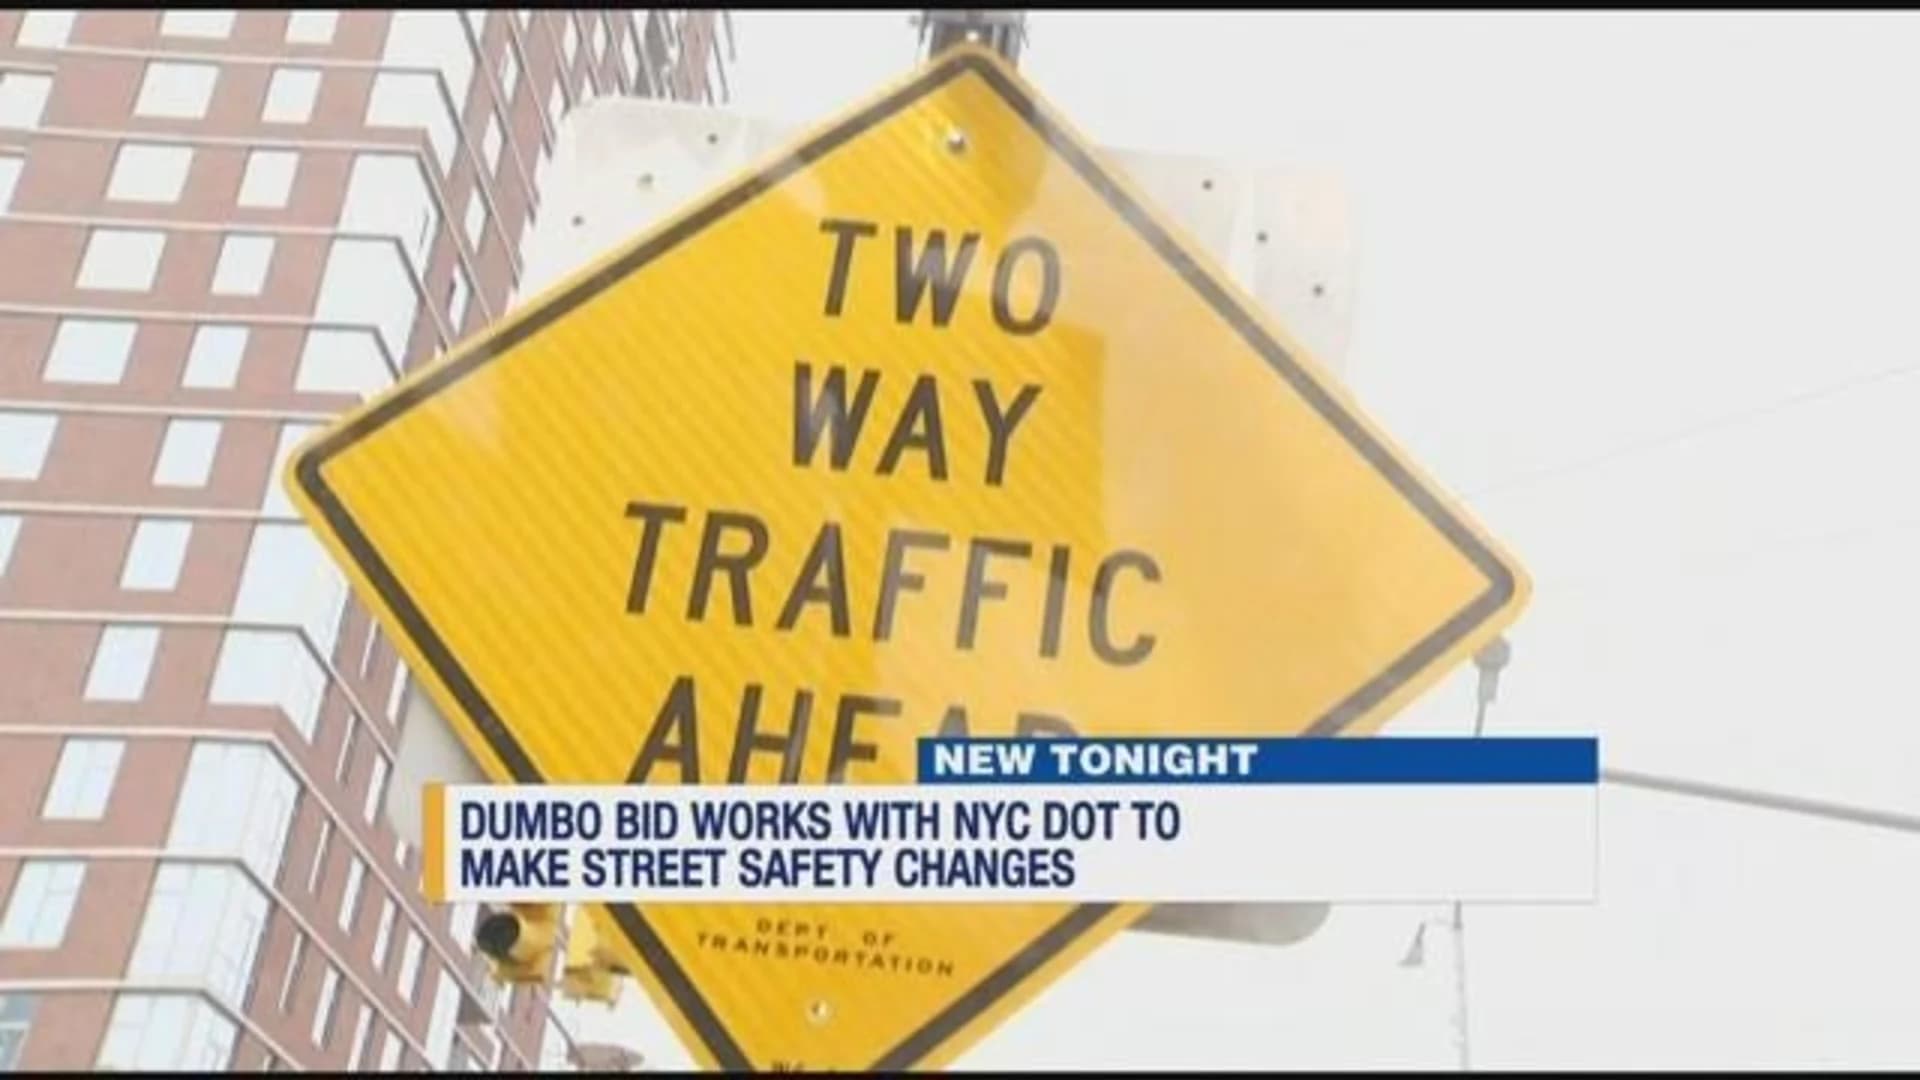 DOT to make safety improvements in Dumbo